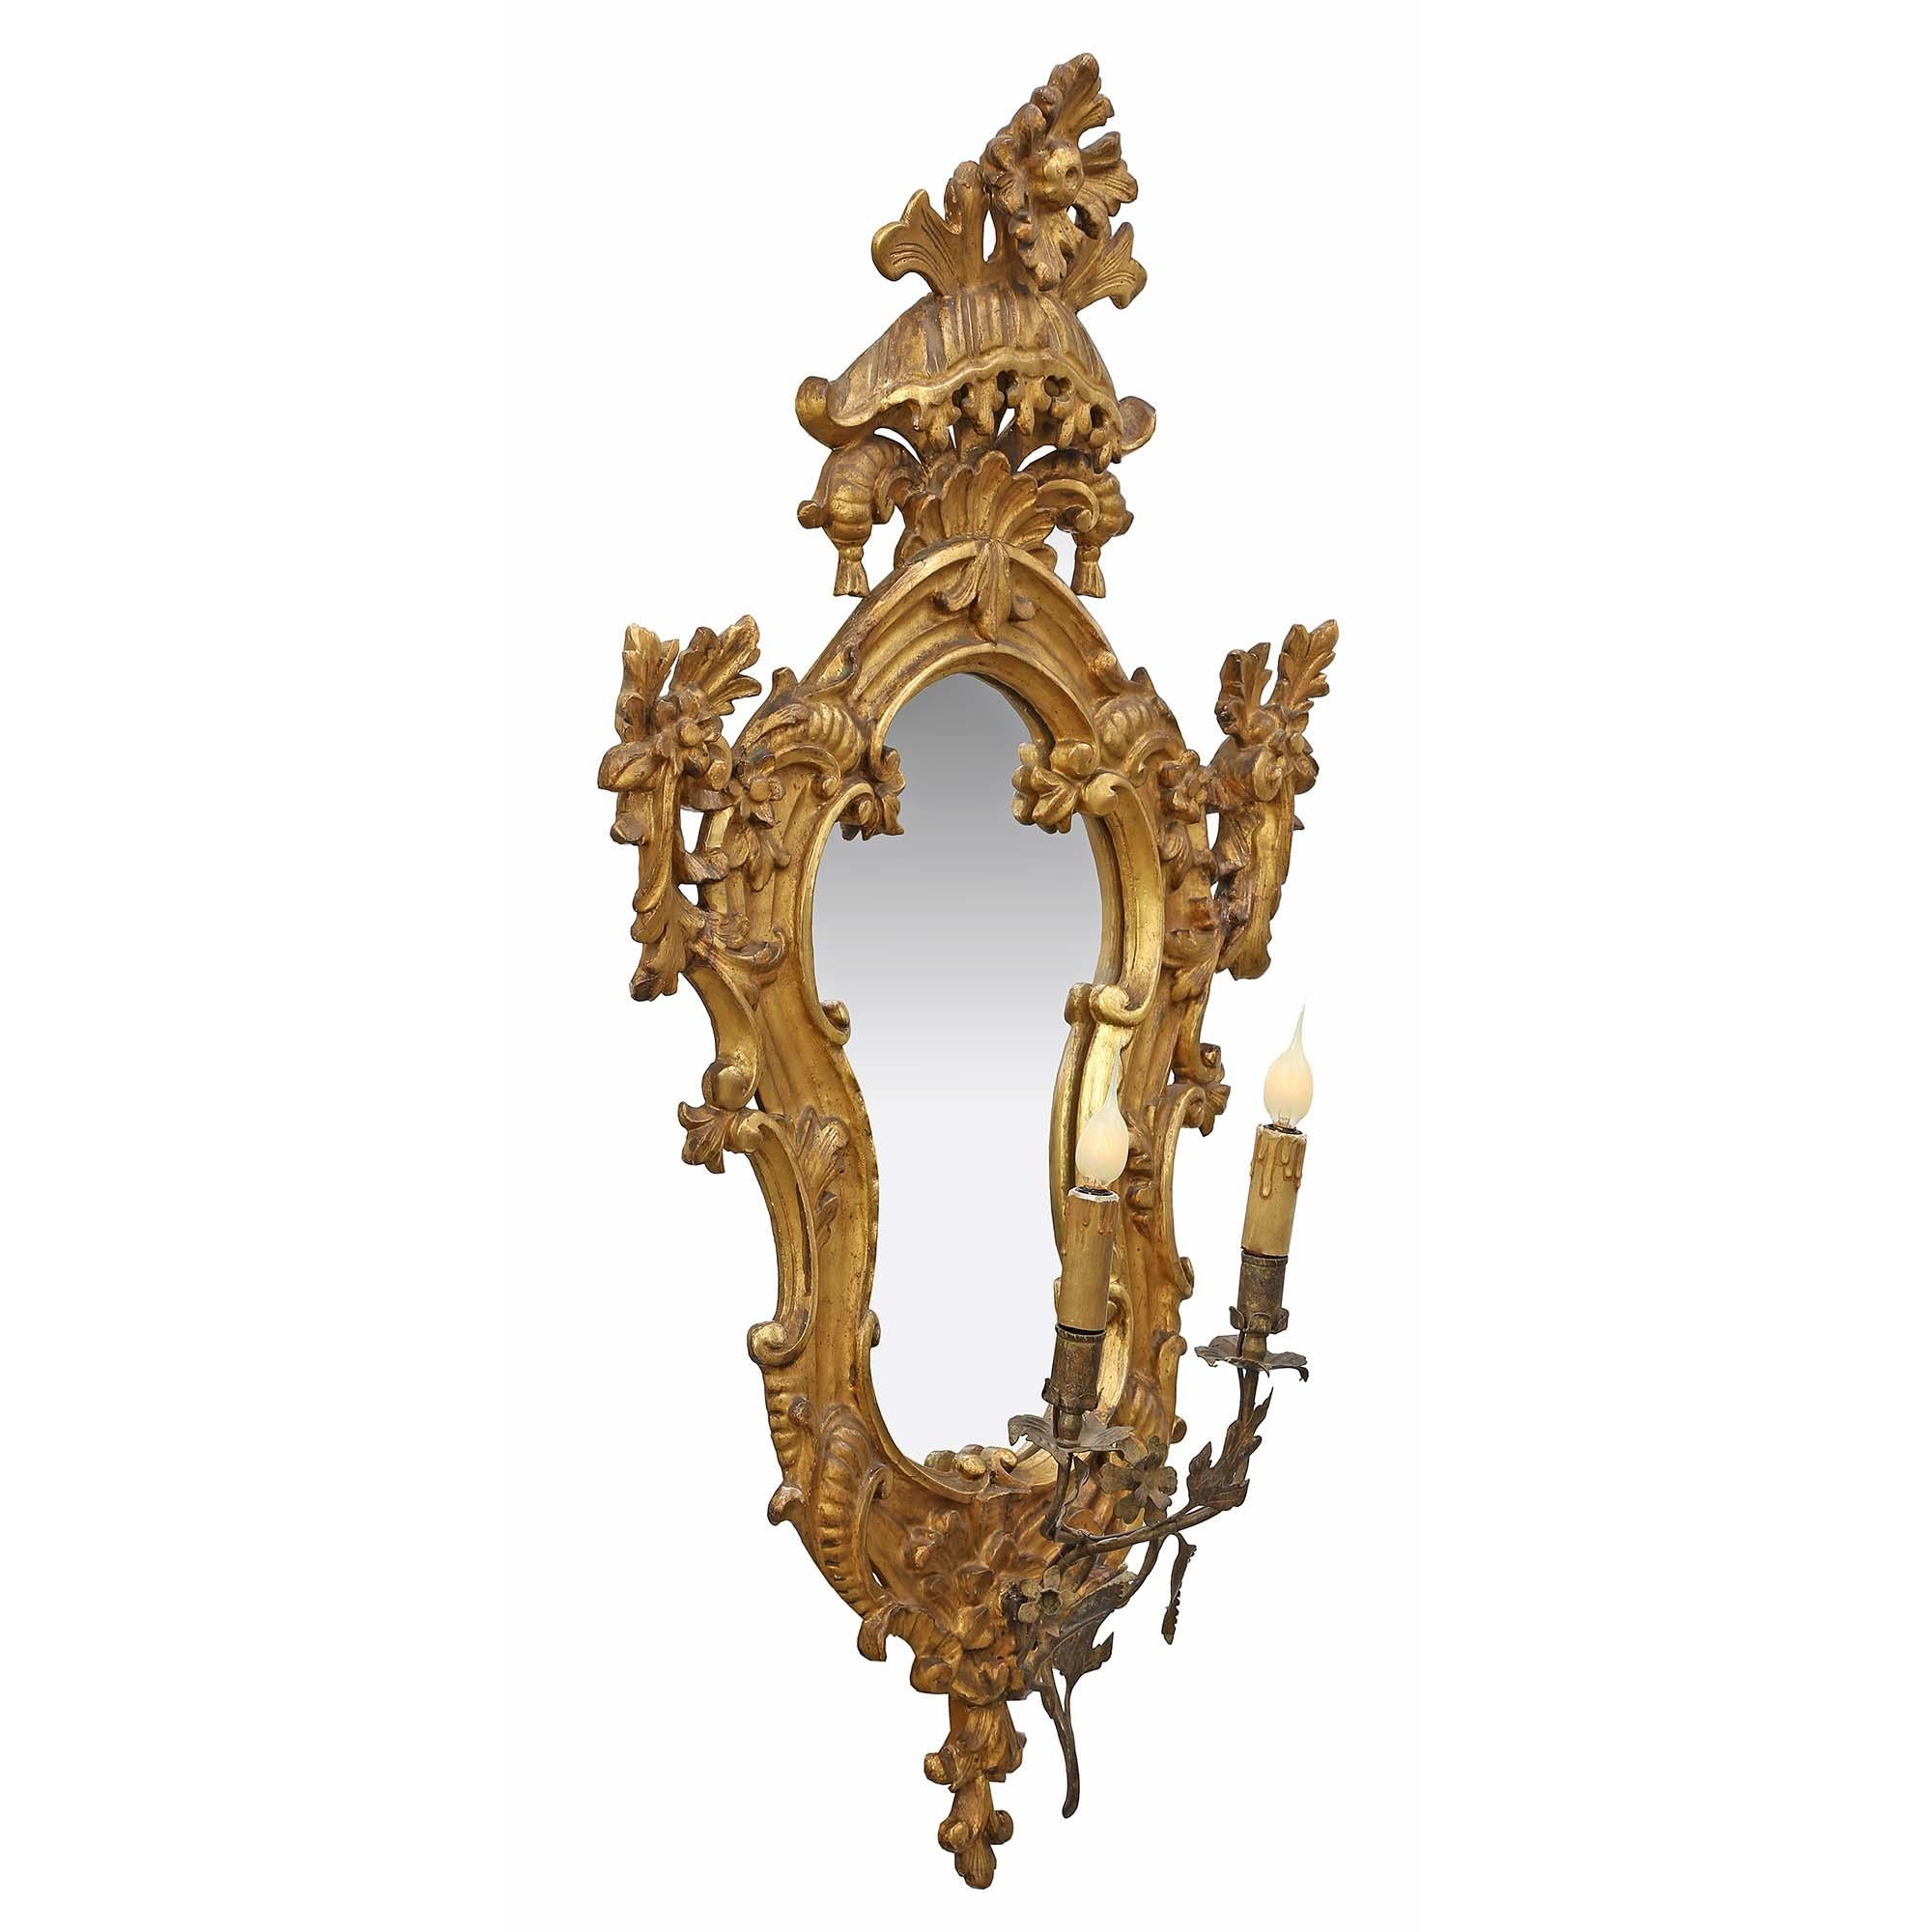 A sensational and high quality pair of mid 18th century Italian mirrored giltwood electrified sconces. The pair with all original gilt and mirror plates has a scrolled design with blossoming flowers. Above the bottom carved finial are the two